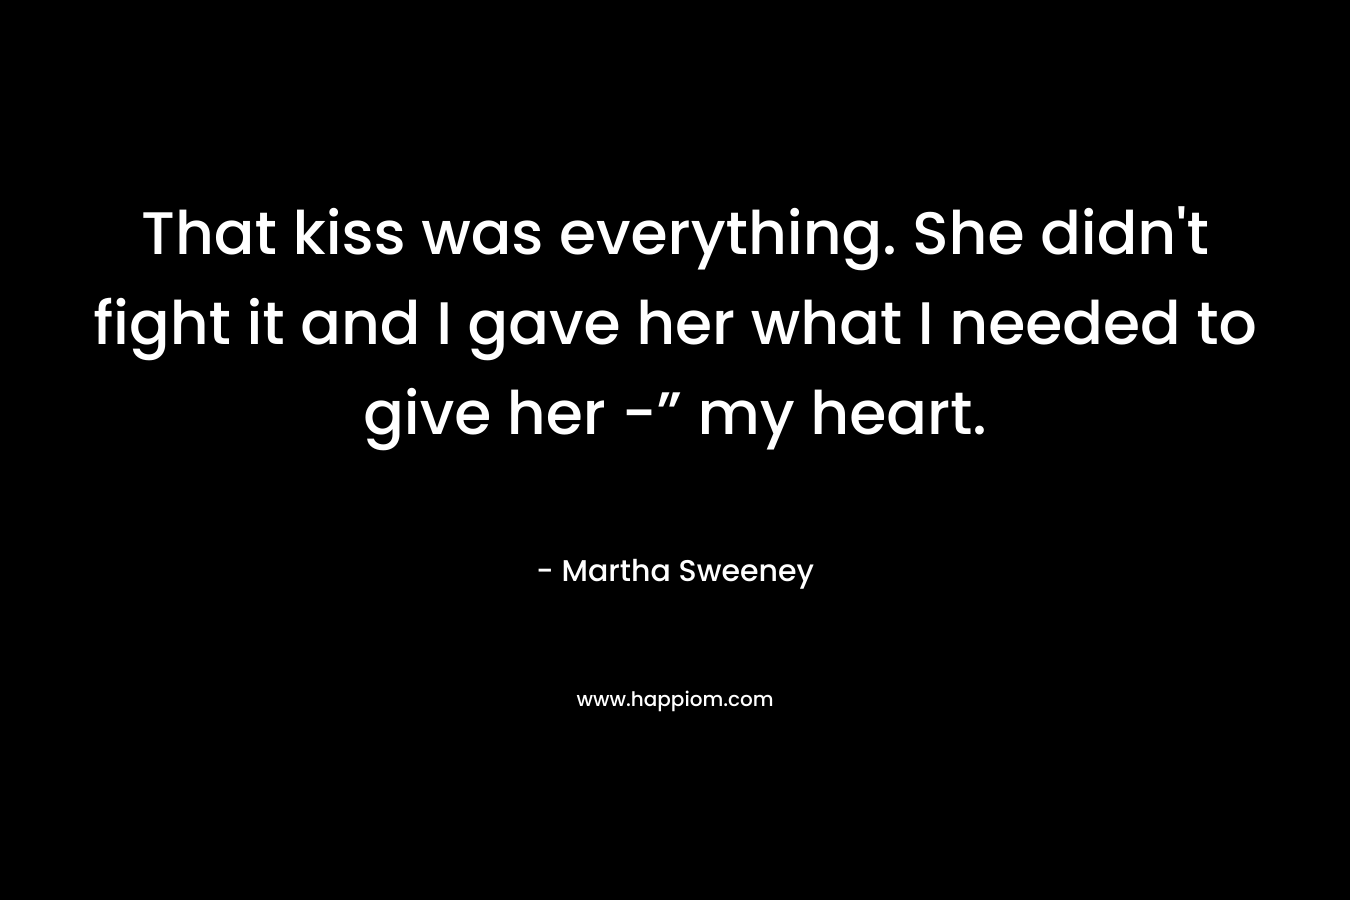 That kiss was everything. She didn’t fight it and I gave her what I needed to give her -” my heart. – Martha Sweeney